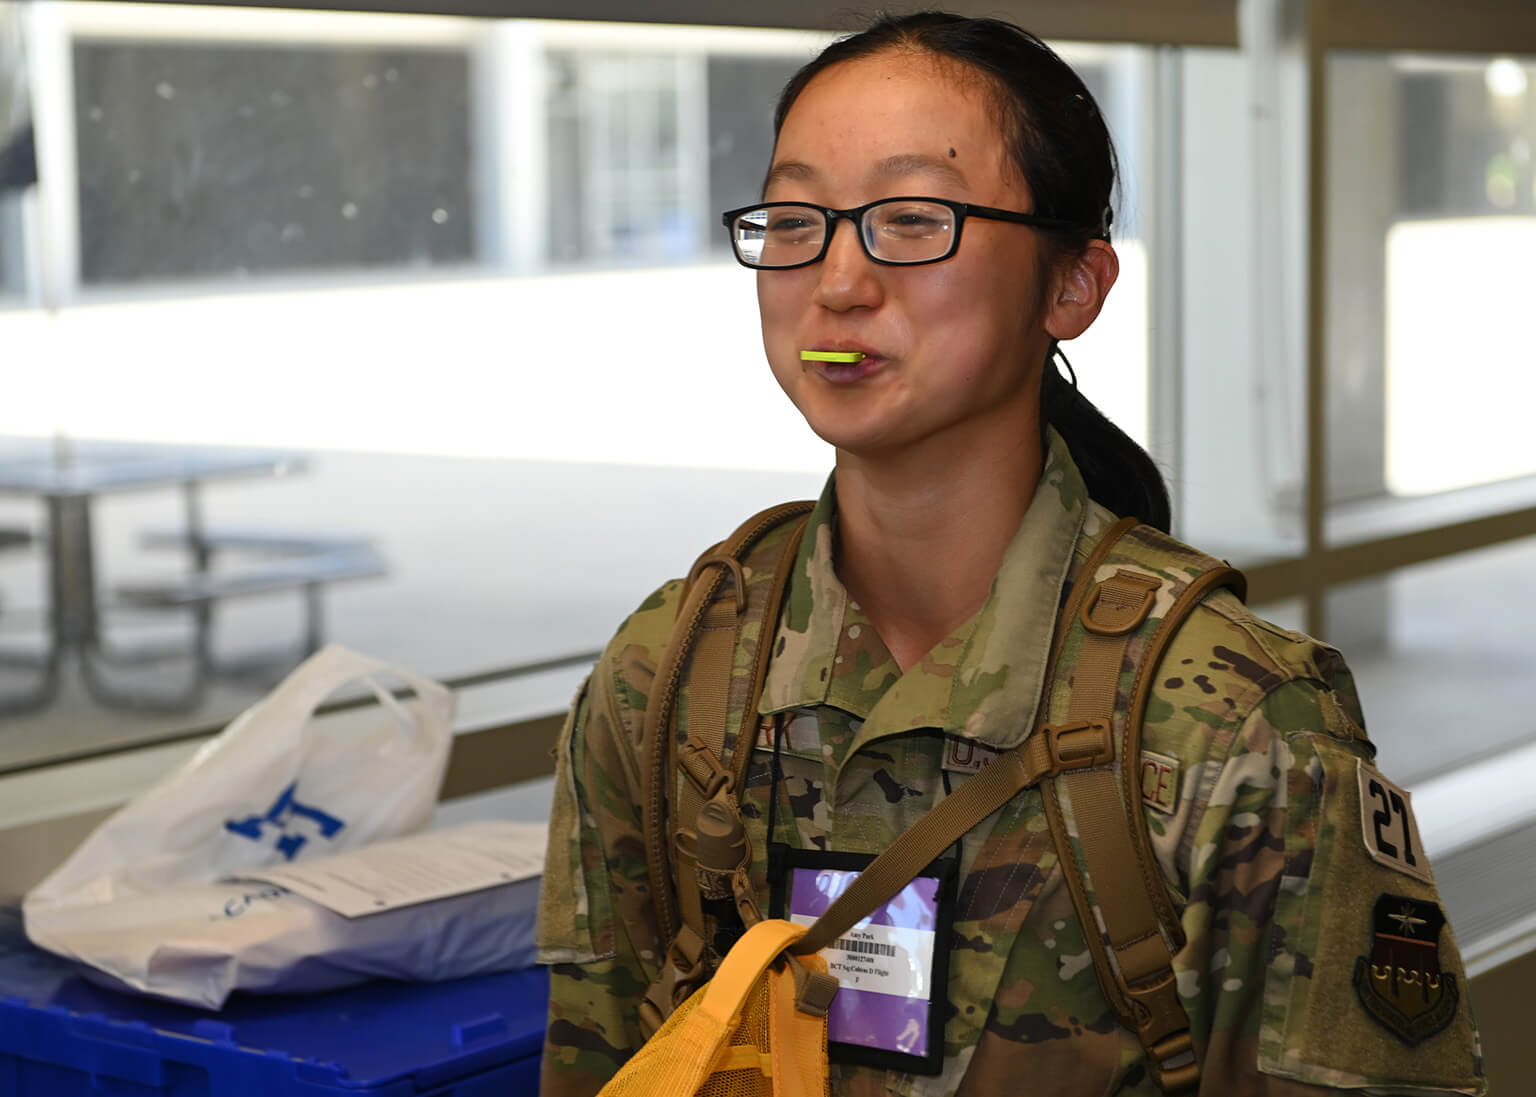 A basic cadet bites down on a mouth guard